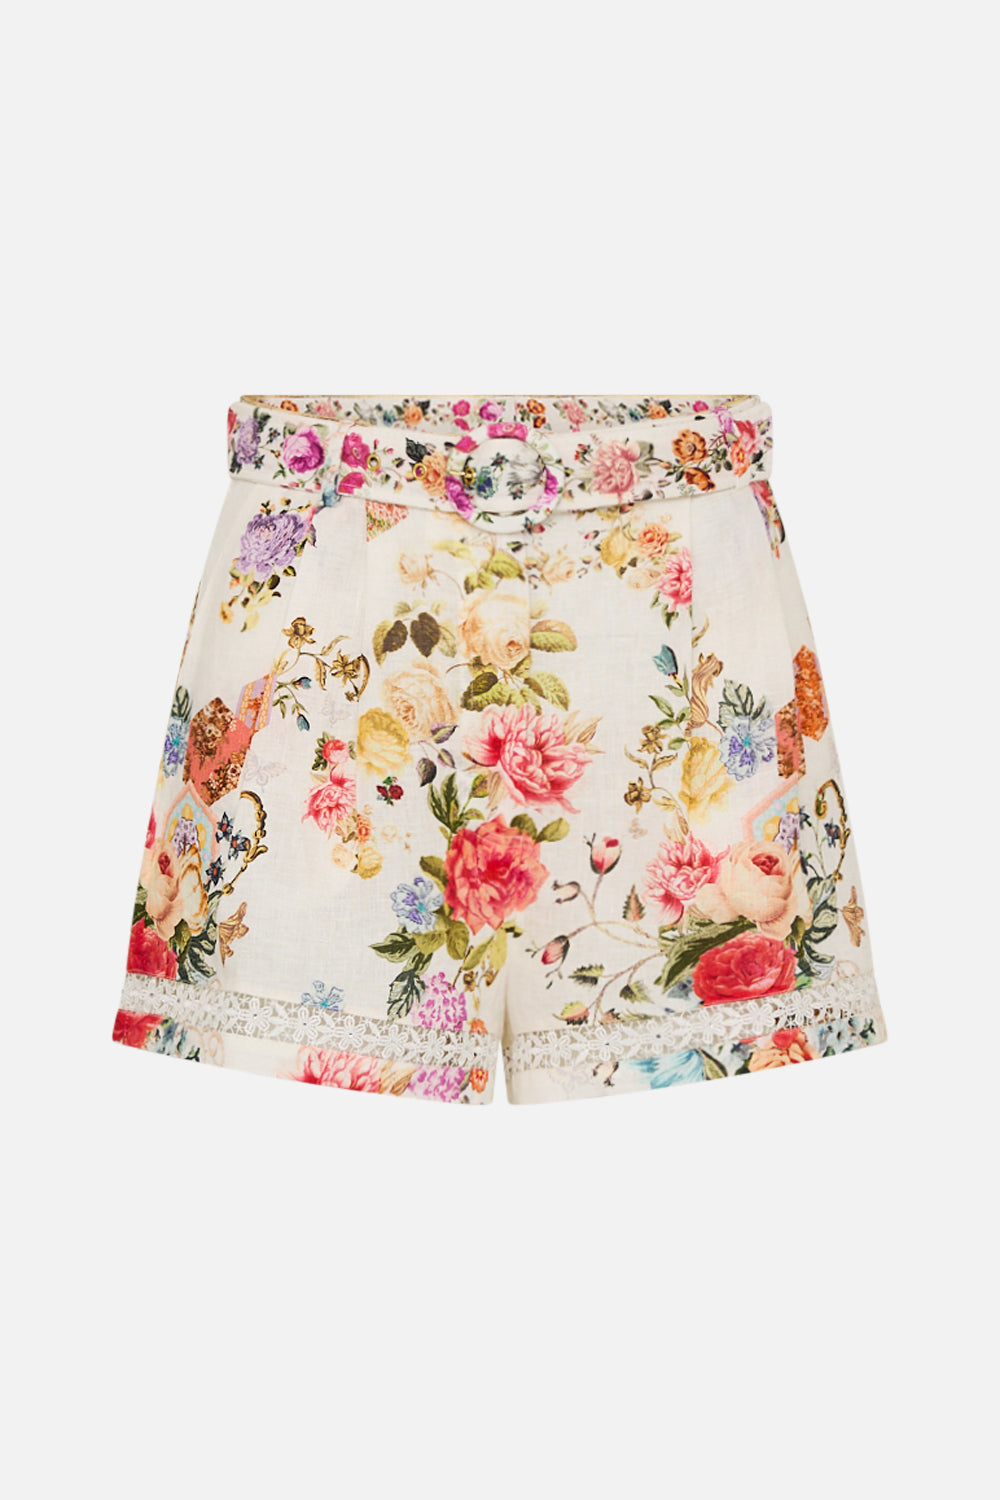 CAMILLA floral high-waisted shorts with lace insert in Sew Yesterday